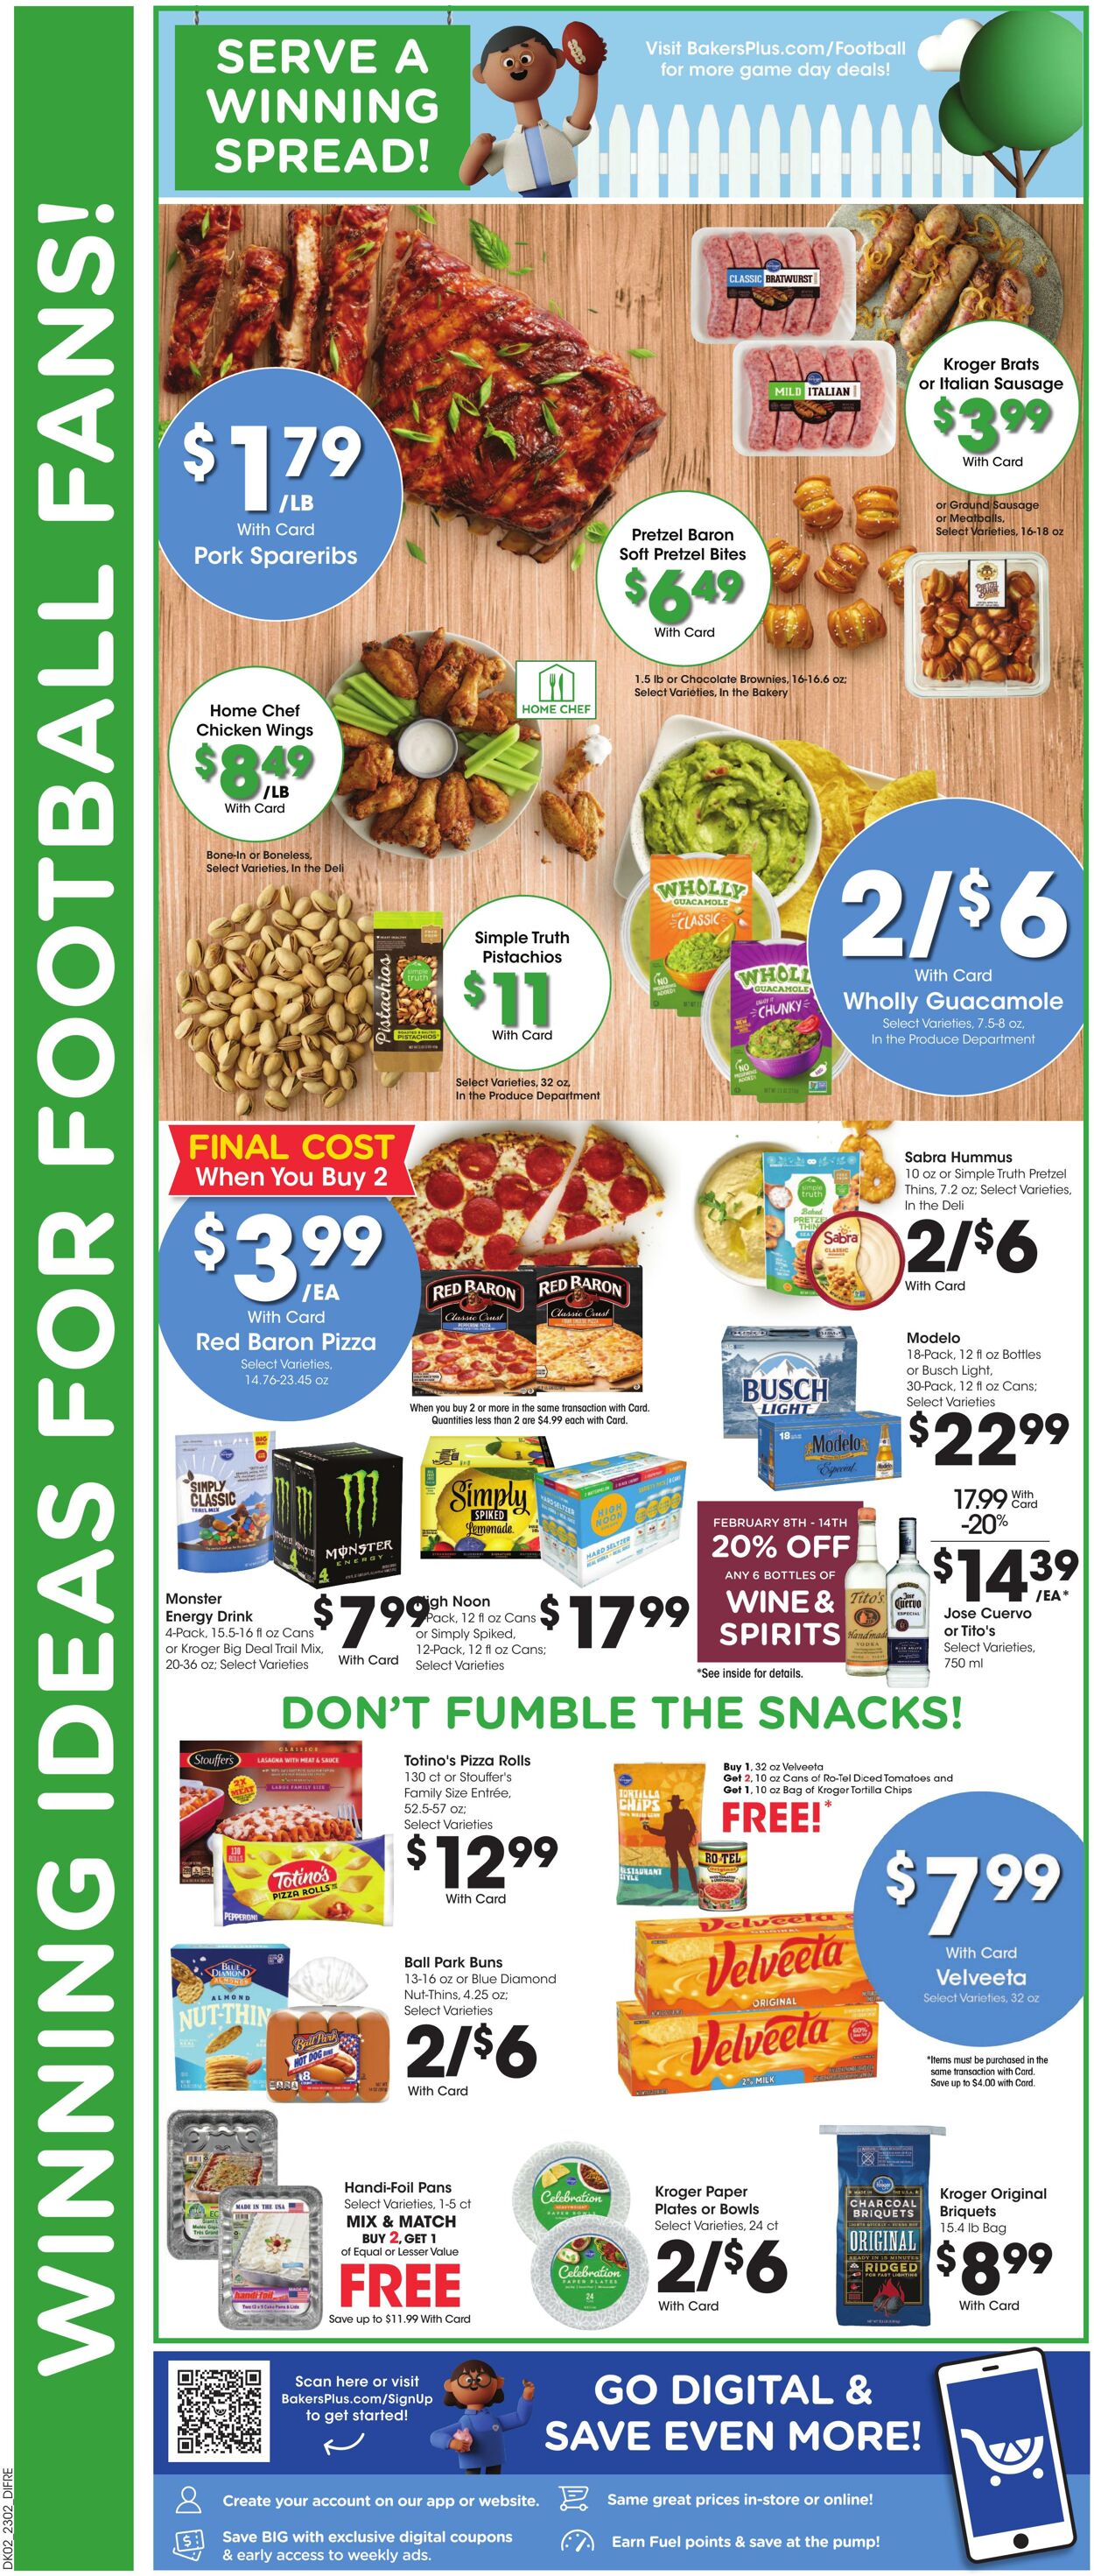 Weekly ad Baker's 02/08/2023 - 02/14/2023